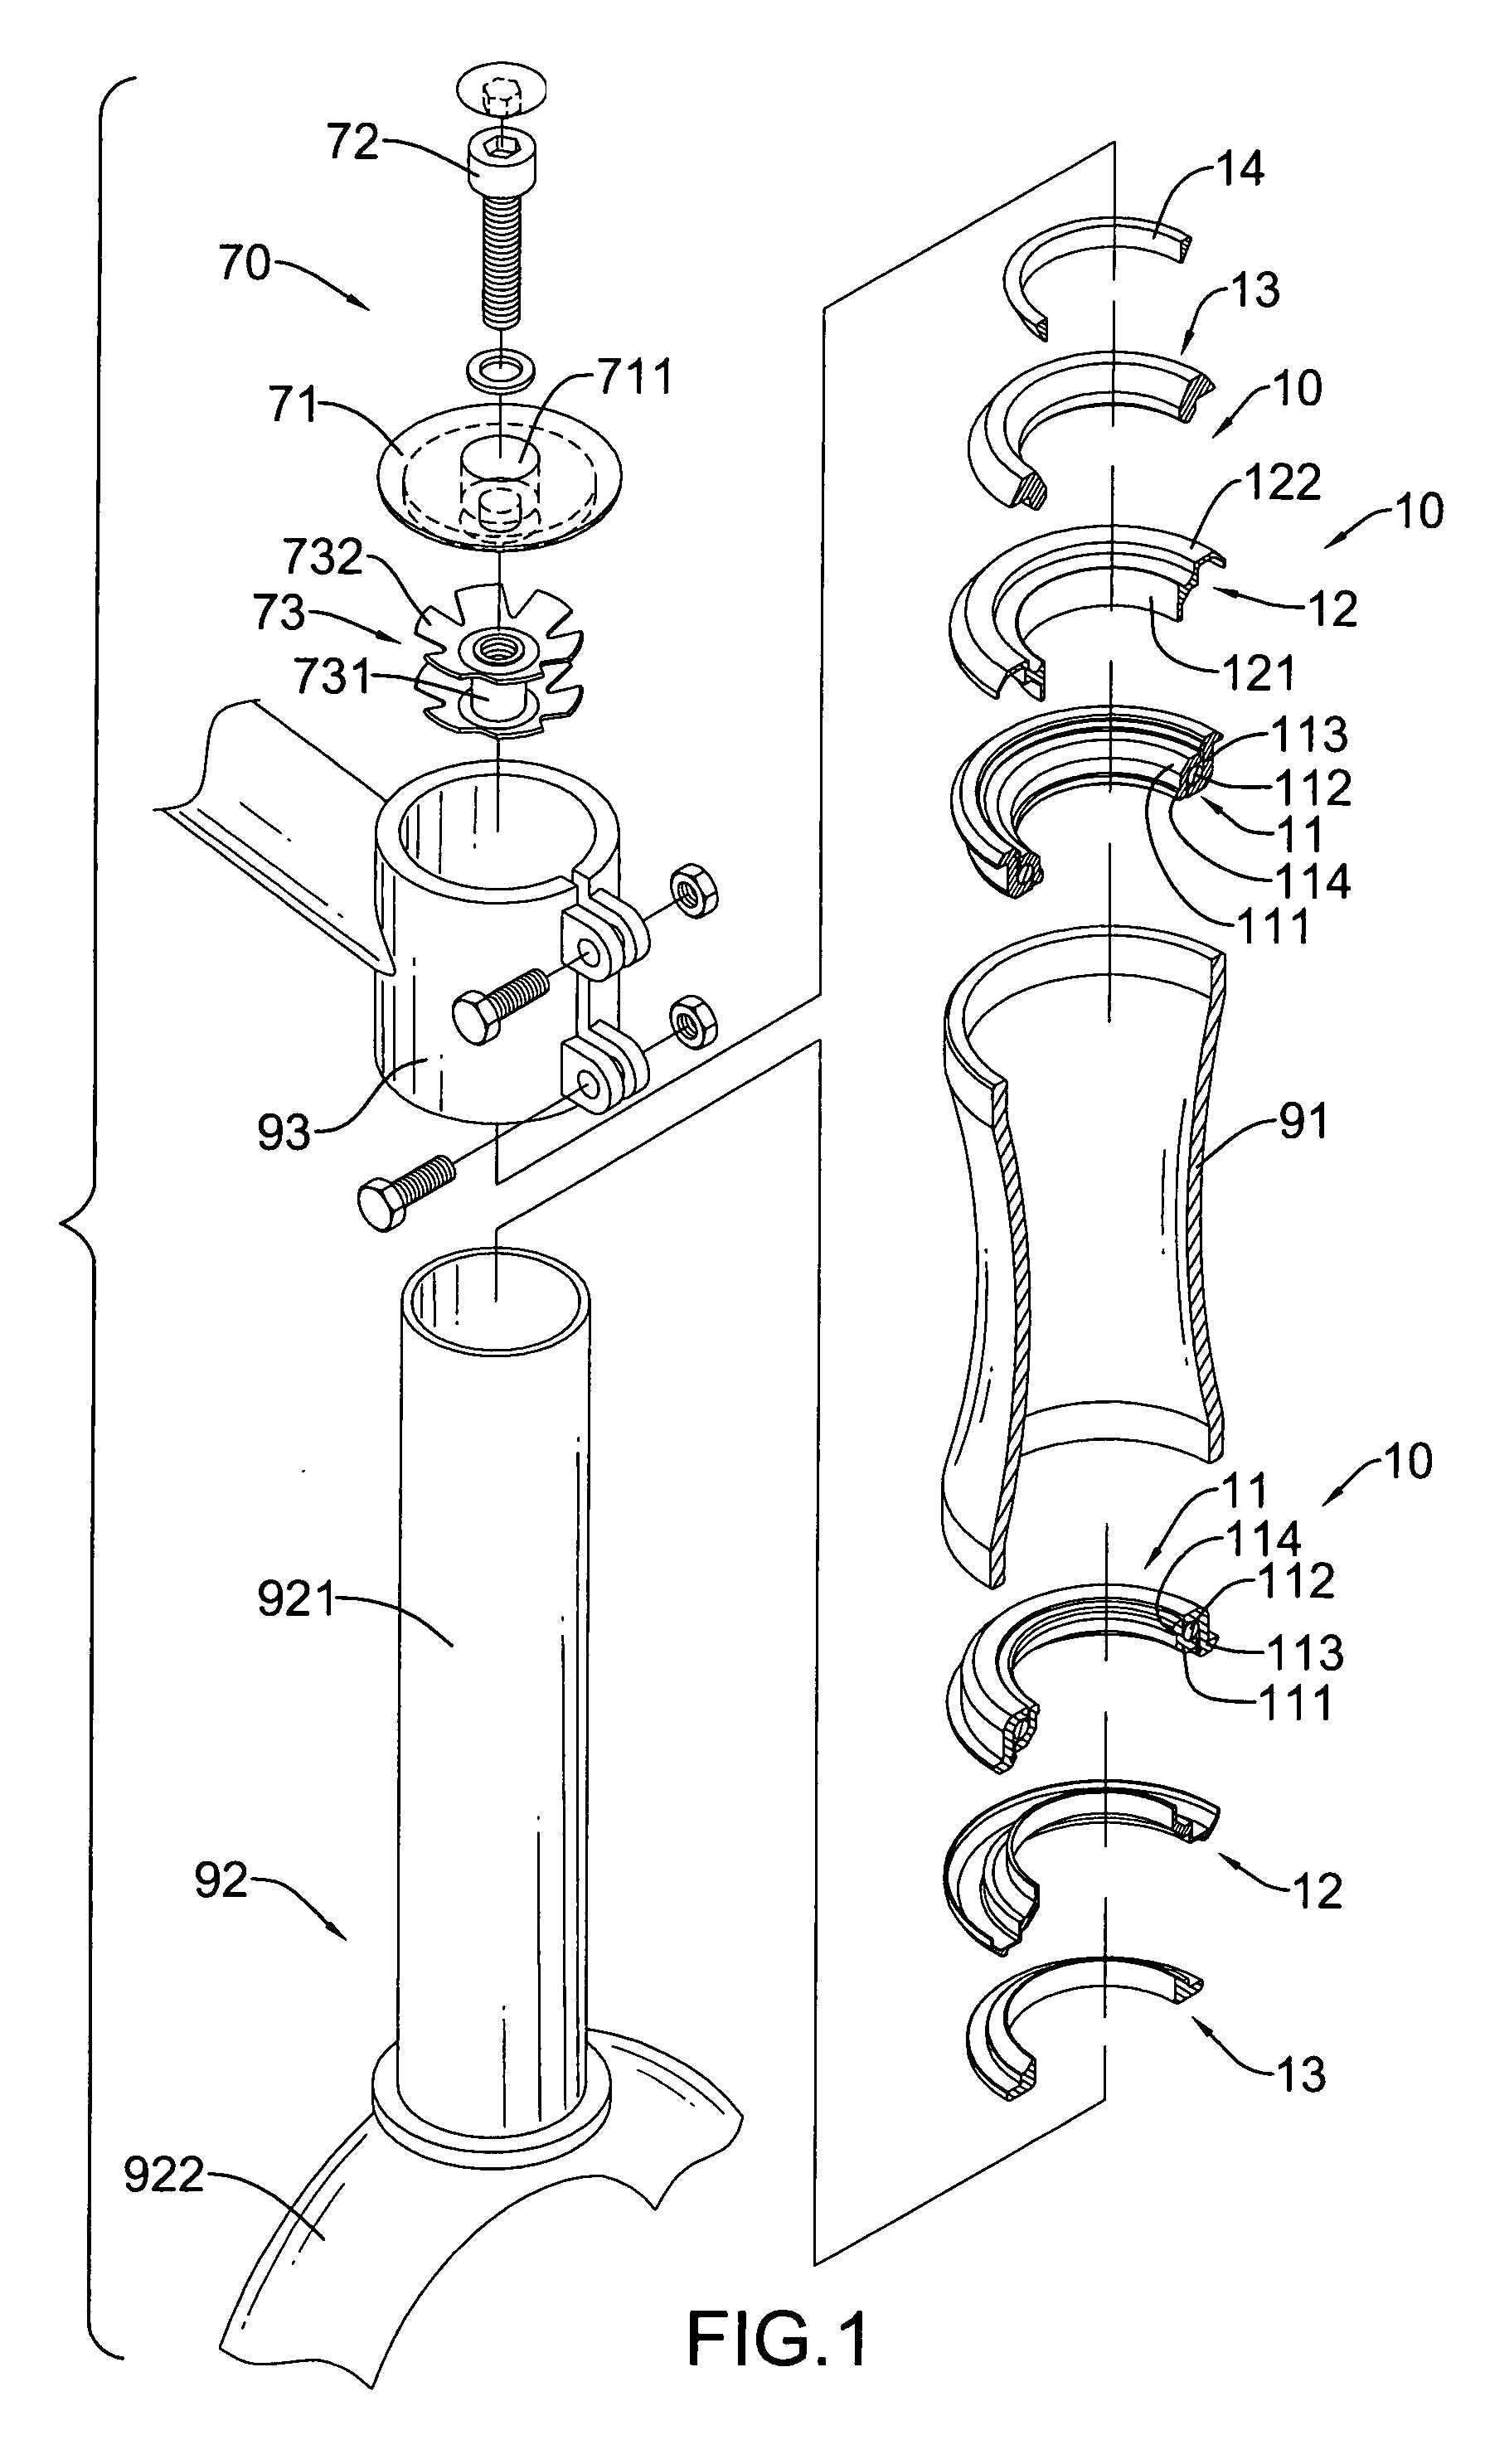 Bearing assembly for a steering apparatus of a bicycle